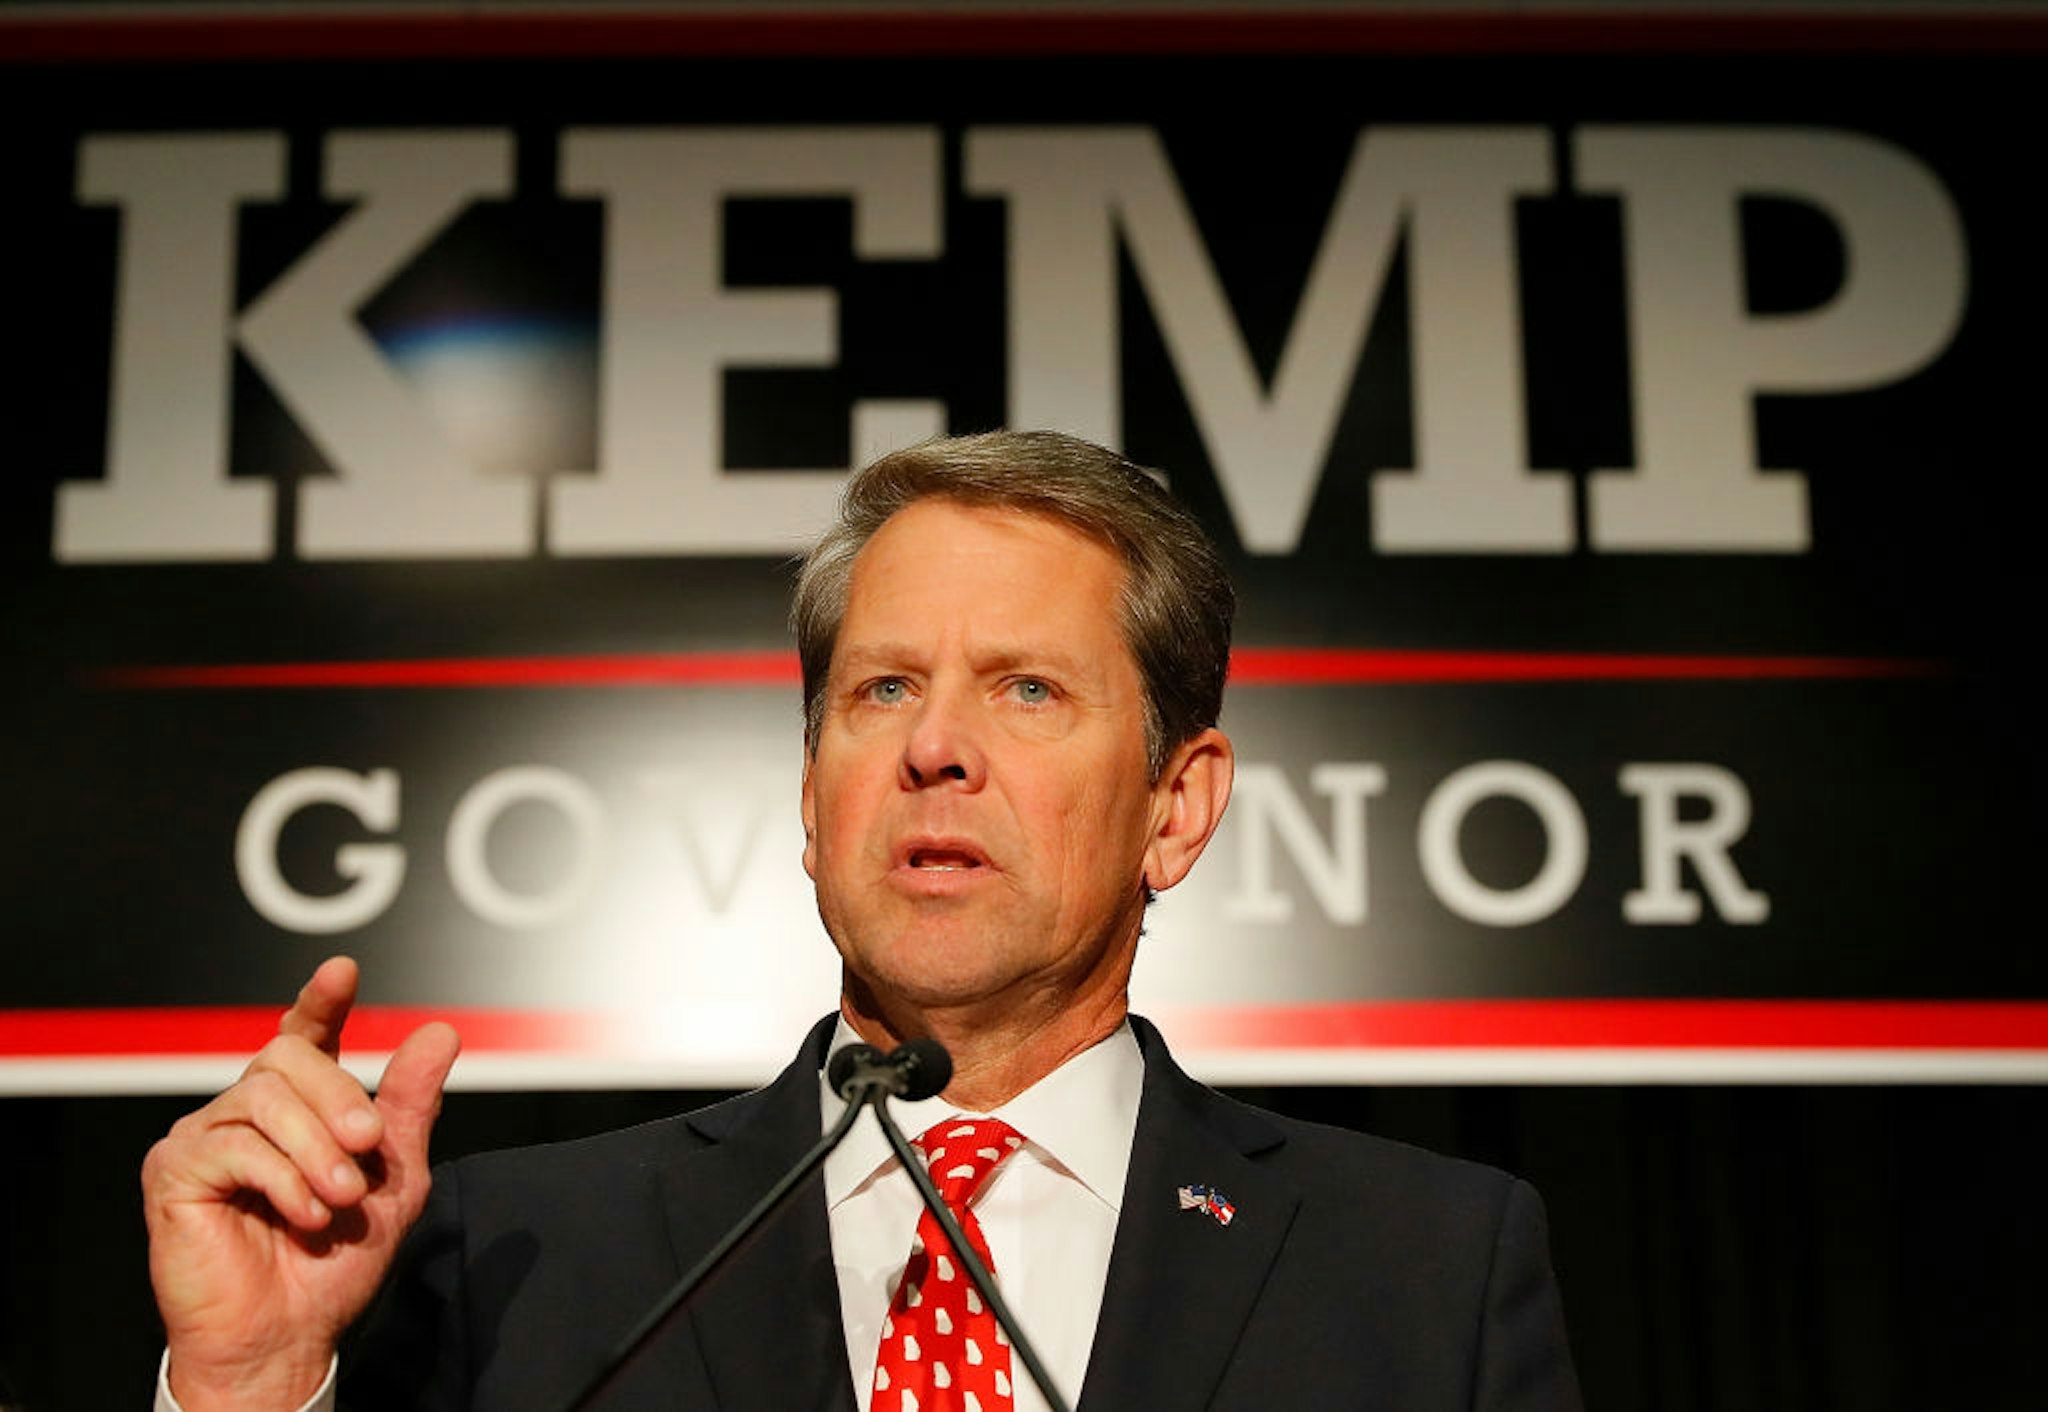 Republican gubernatorial candidate Brian Kemp attends the Election Night event at the Classic Center on November 6, 2018 in Athens, Georgia. Kemp is in a close race with Democrat Stacey Abrams.